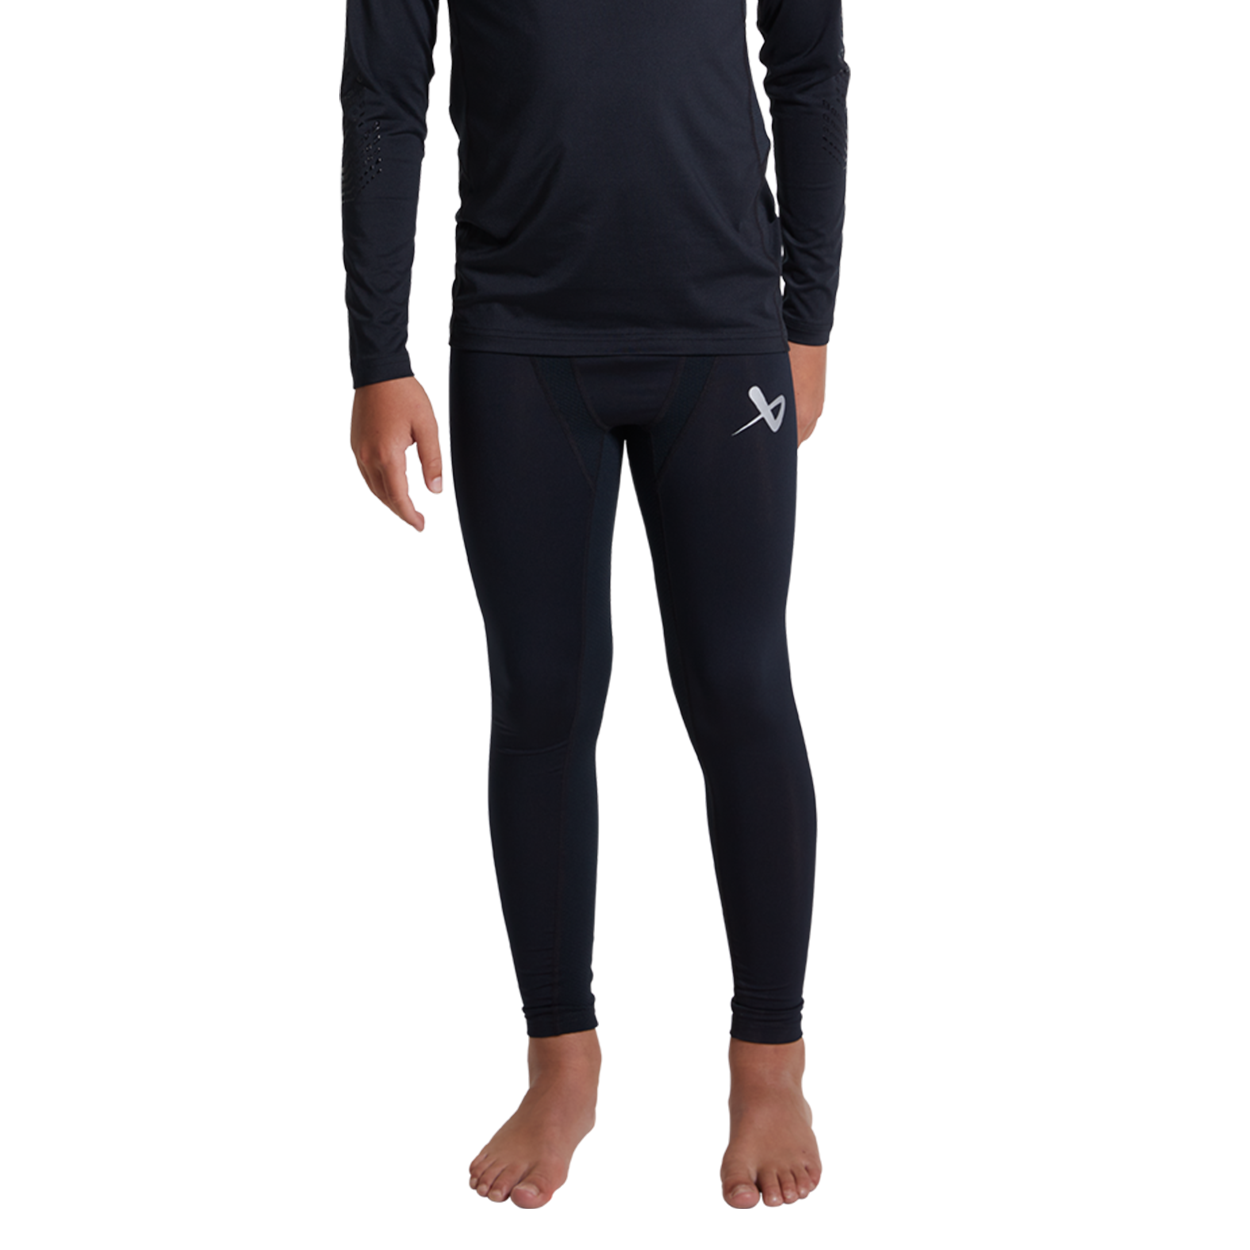 BAUER PRO COMPETE BASELAYER PANT YOUTH